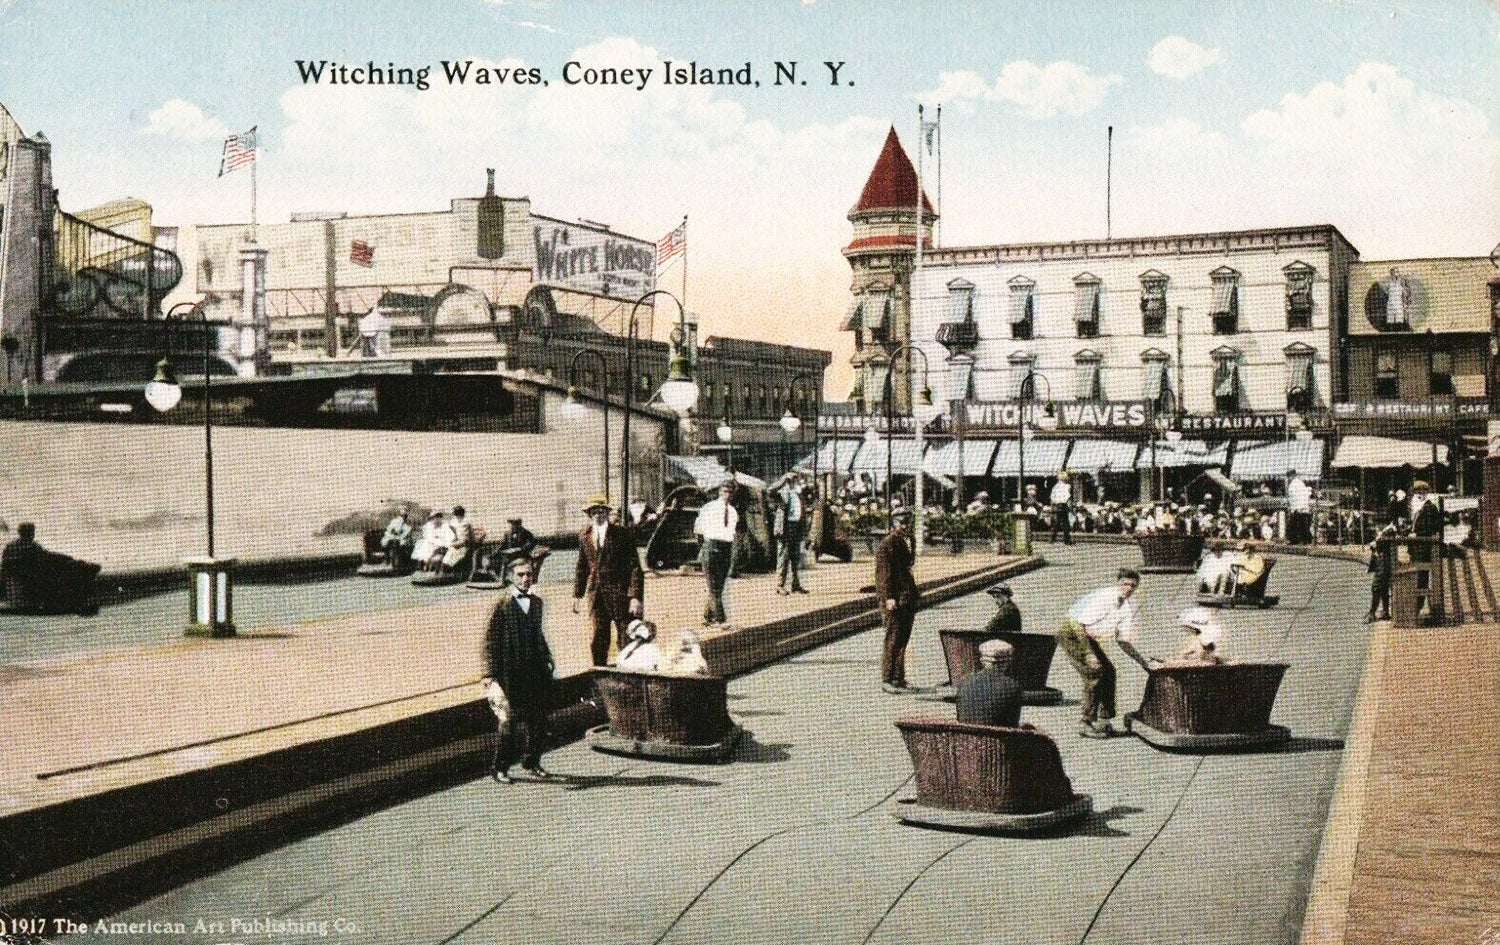 Postcard of Witching Waves ride at Luna Park in Coney Island, NY, 1917